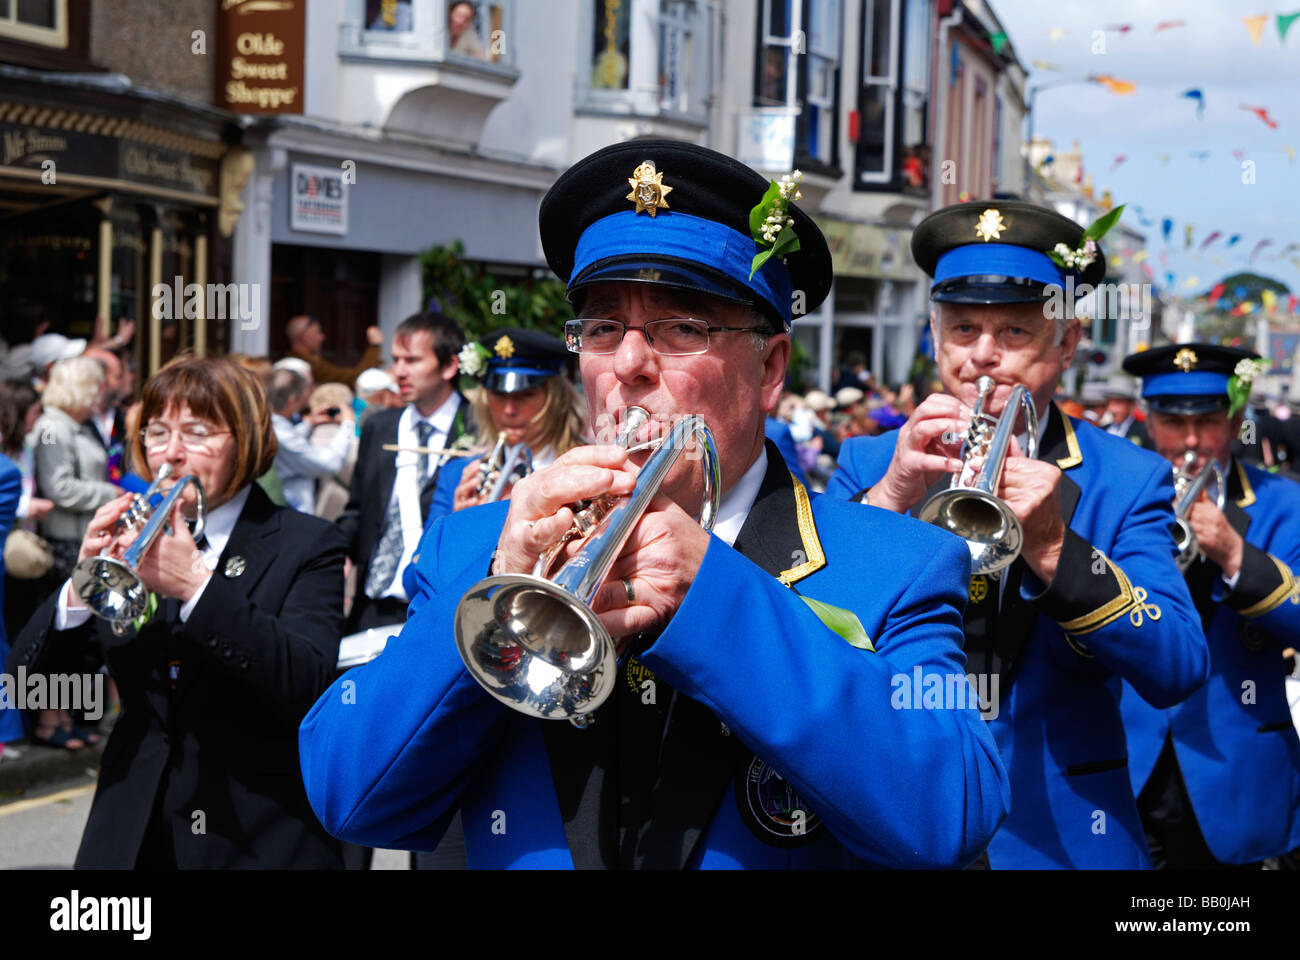 the helston town band playing and marching in the streets of helston,cornwall,uk  on flora day Stock Photo